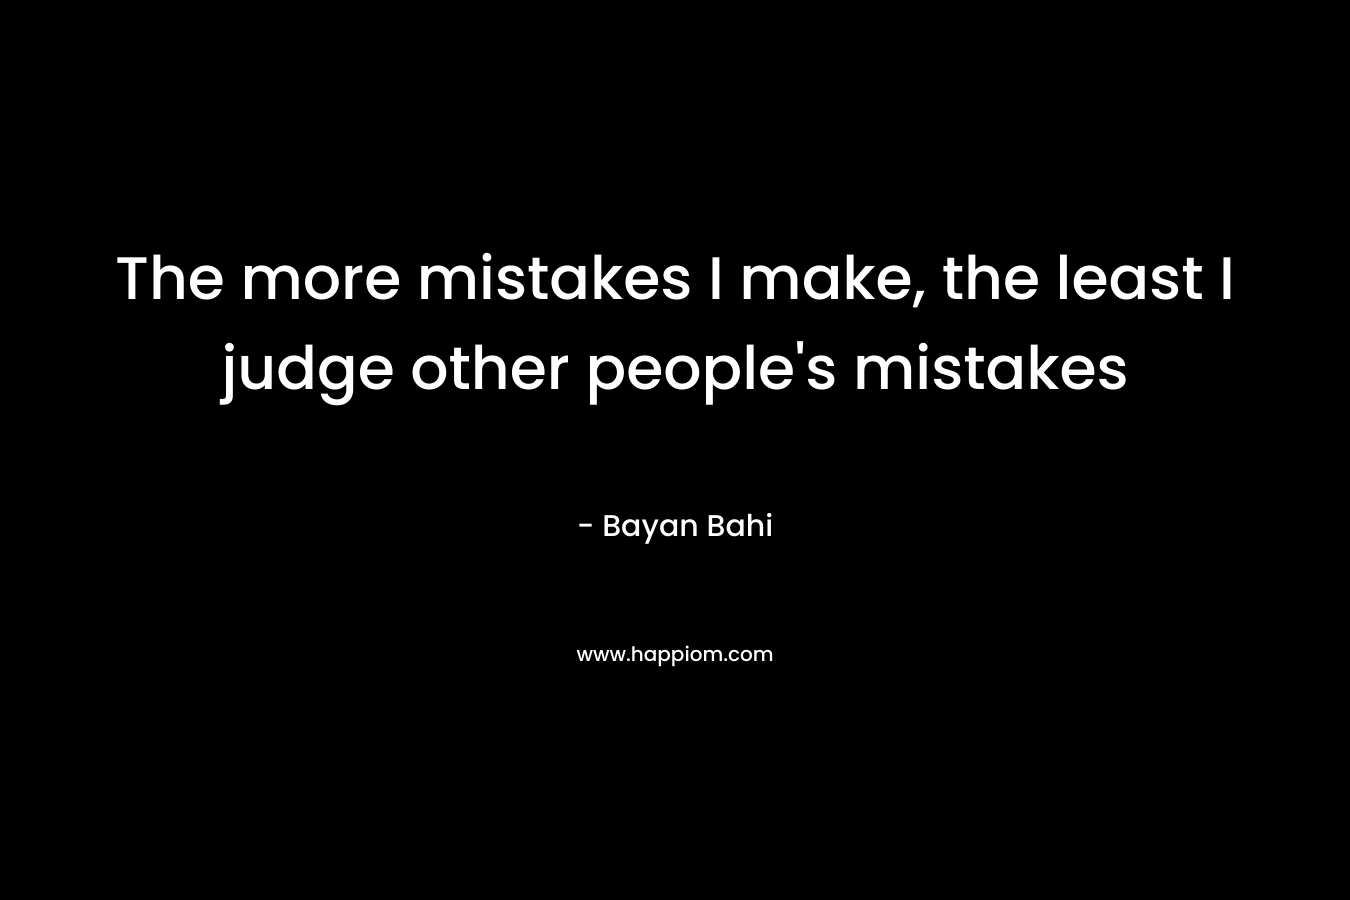 The more mistakes I make, the least I judge other people's mistakes